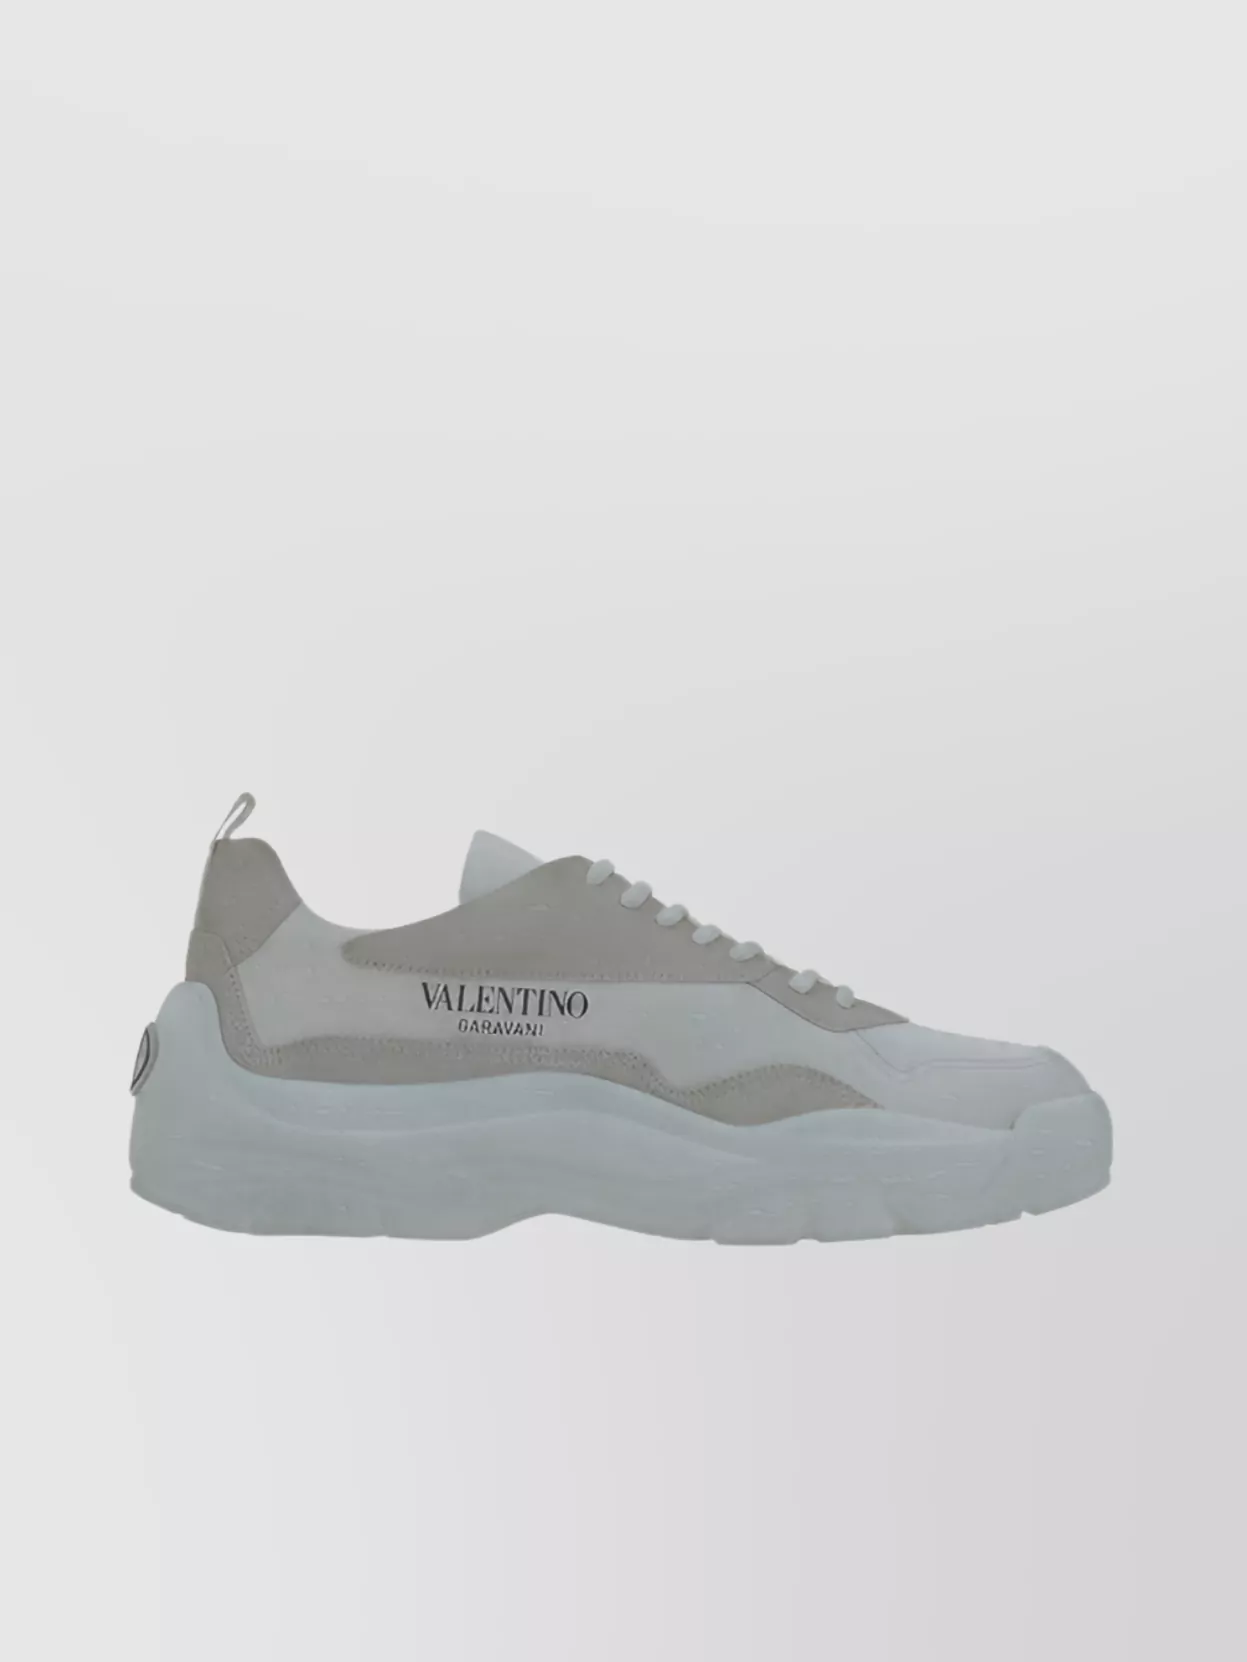 Shop Valentino Calfskin Panelled Sneakers Gumboy Style